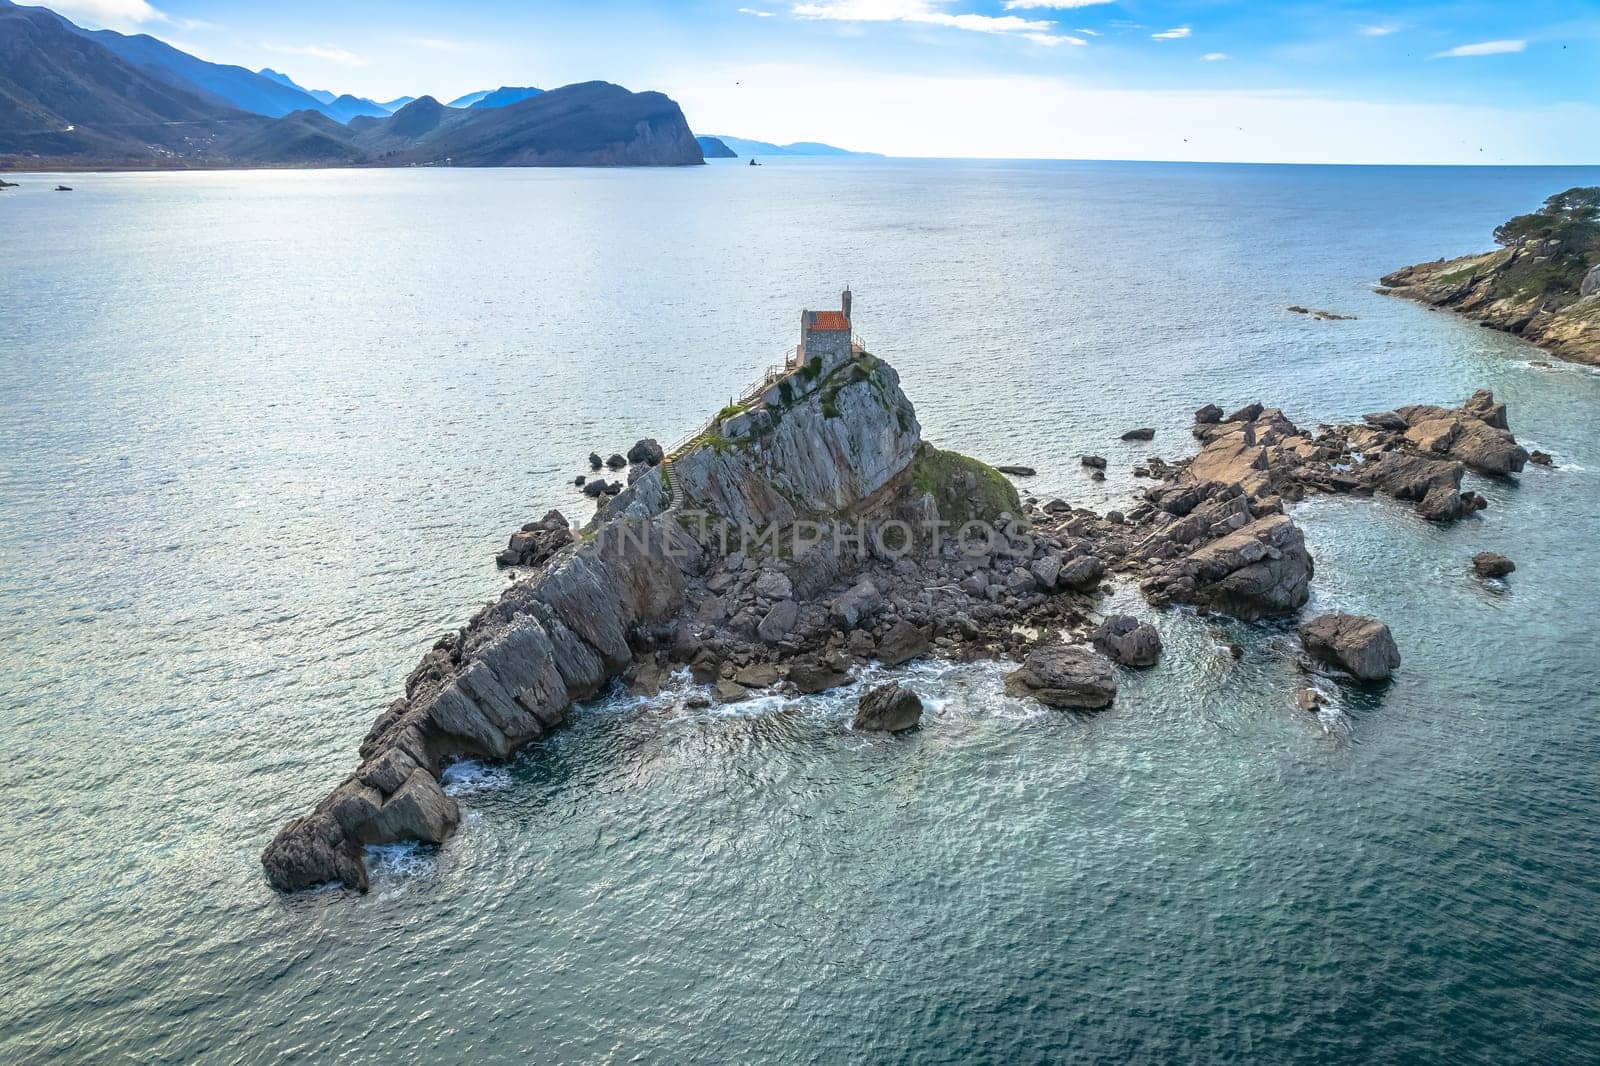 Church on the rock on Katic islet in Petrovac aerial view by xbrchx